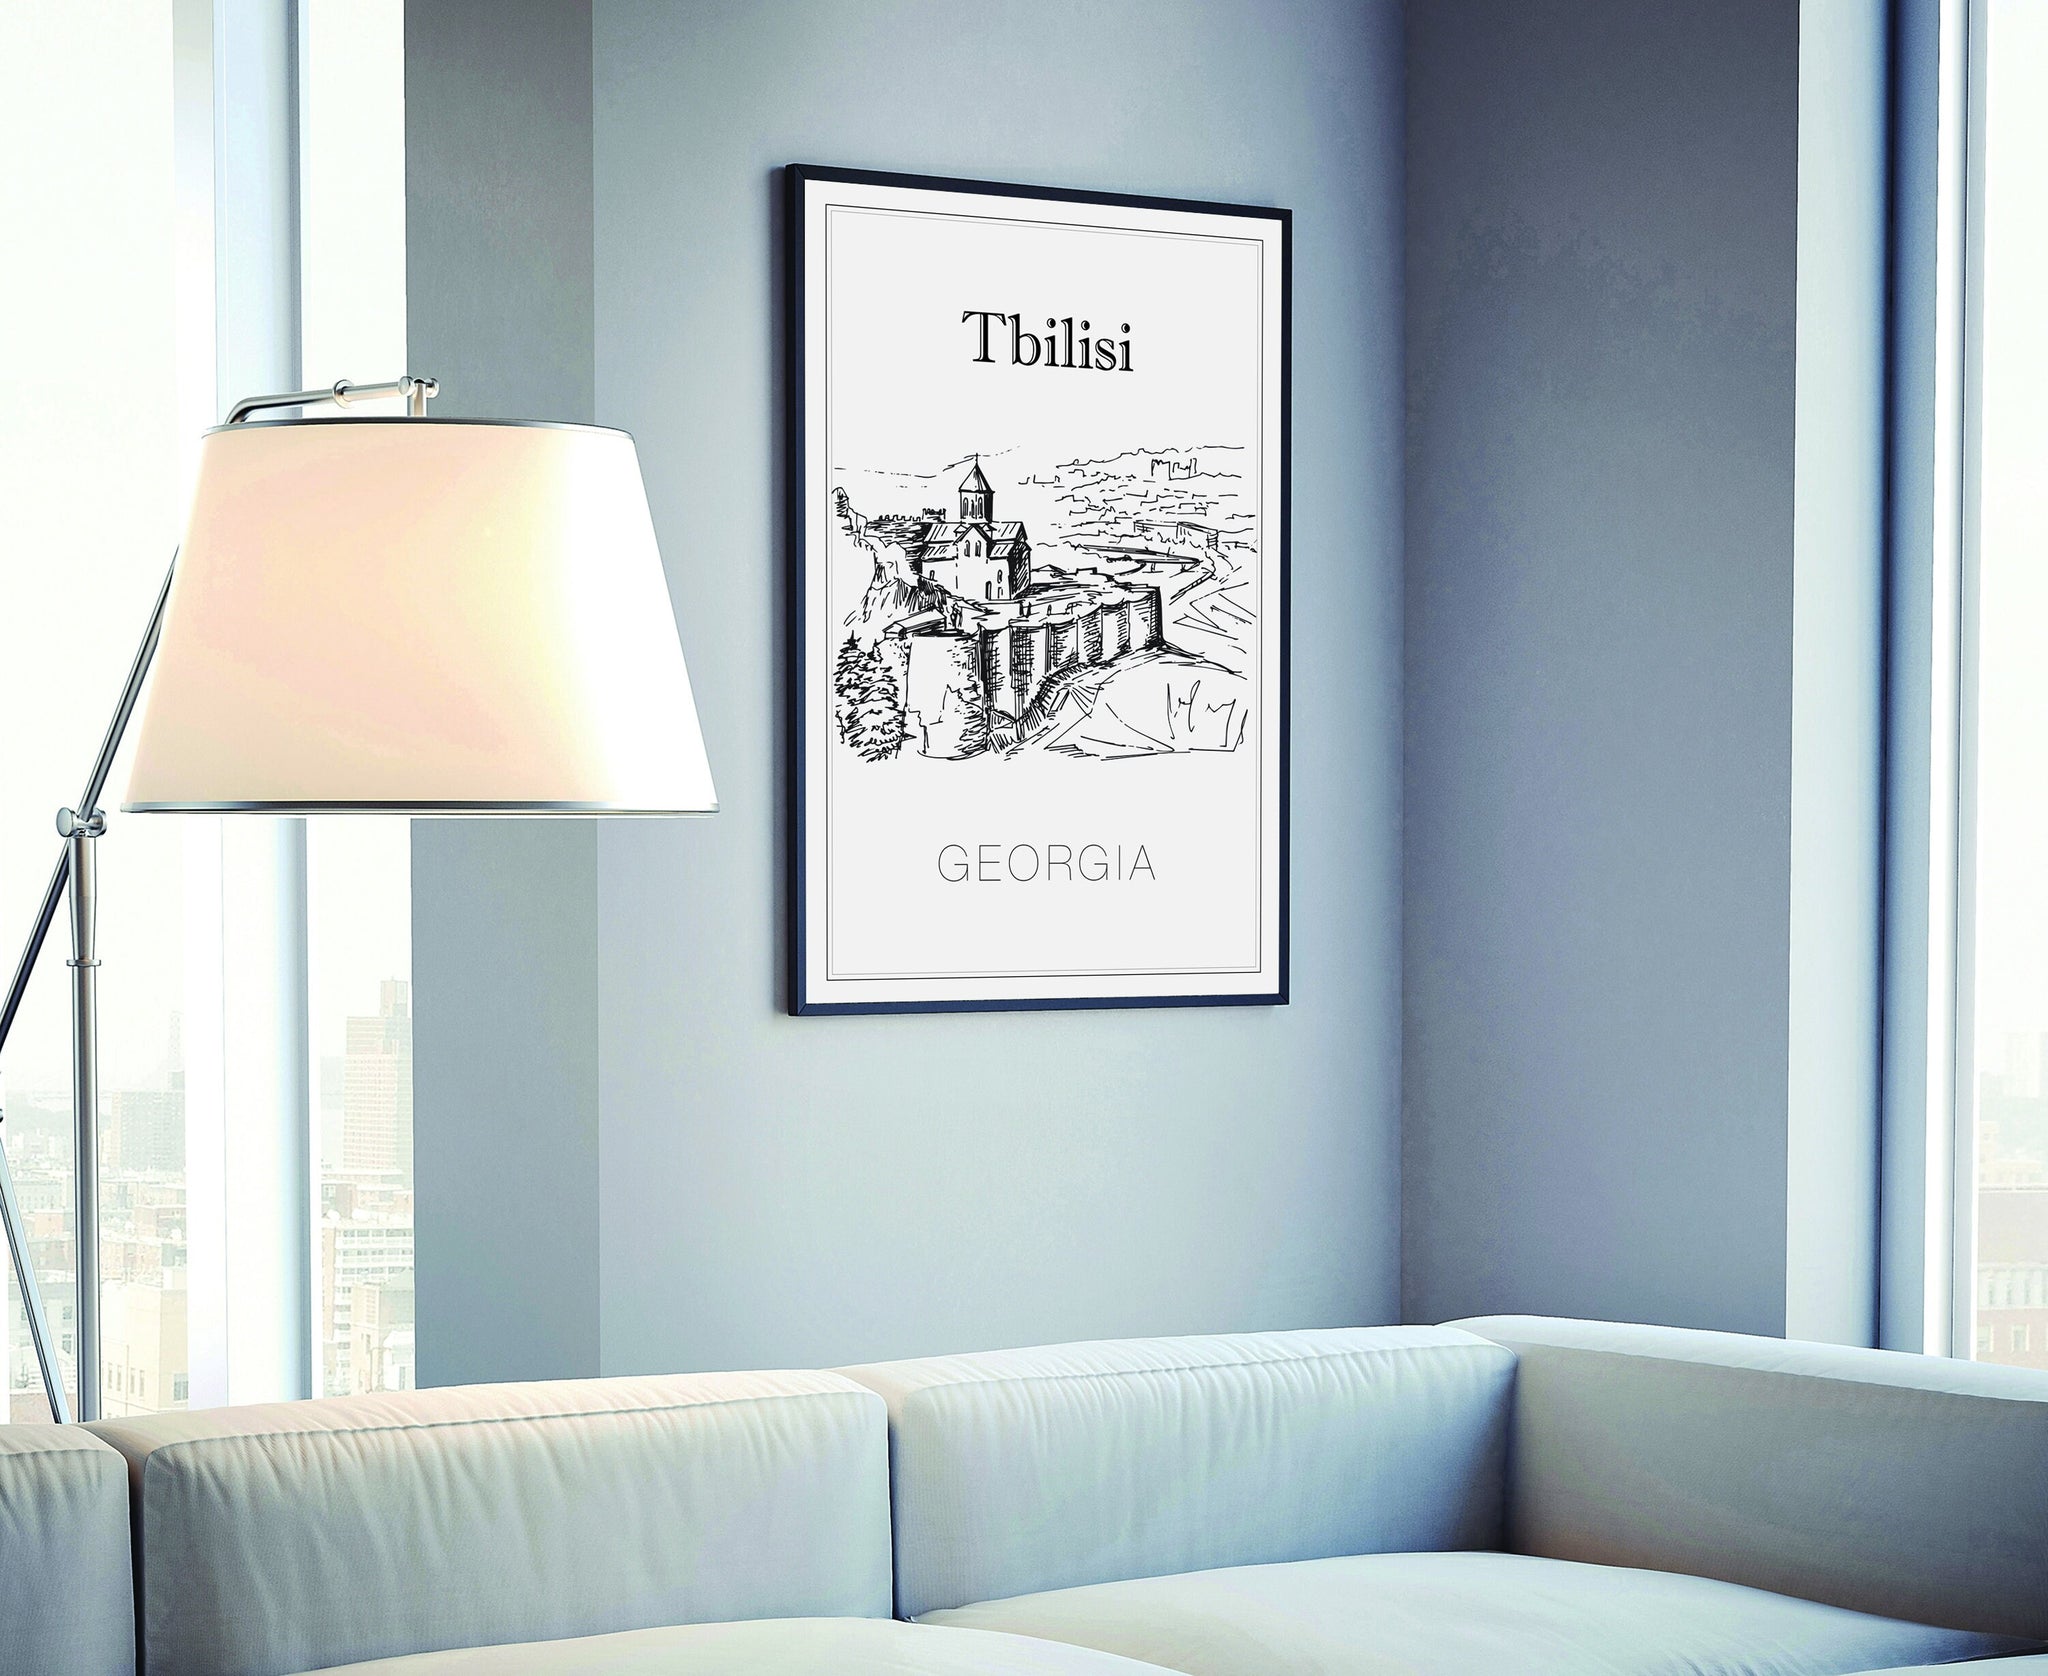 Hand Drawn Poster, Tbilisi Travel Poster, Georgia Poster Wall Art, Tbilisi Cityscape and Landmark Map, Georgia City Map Poster for Home